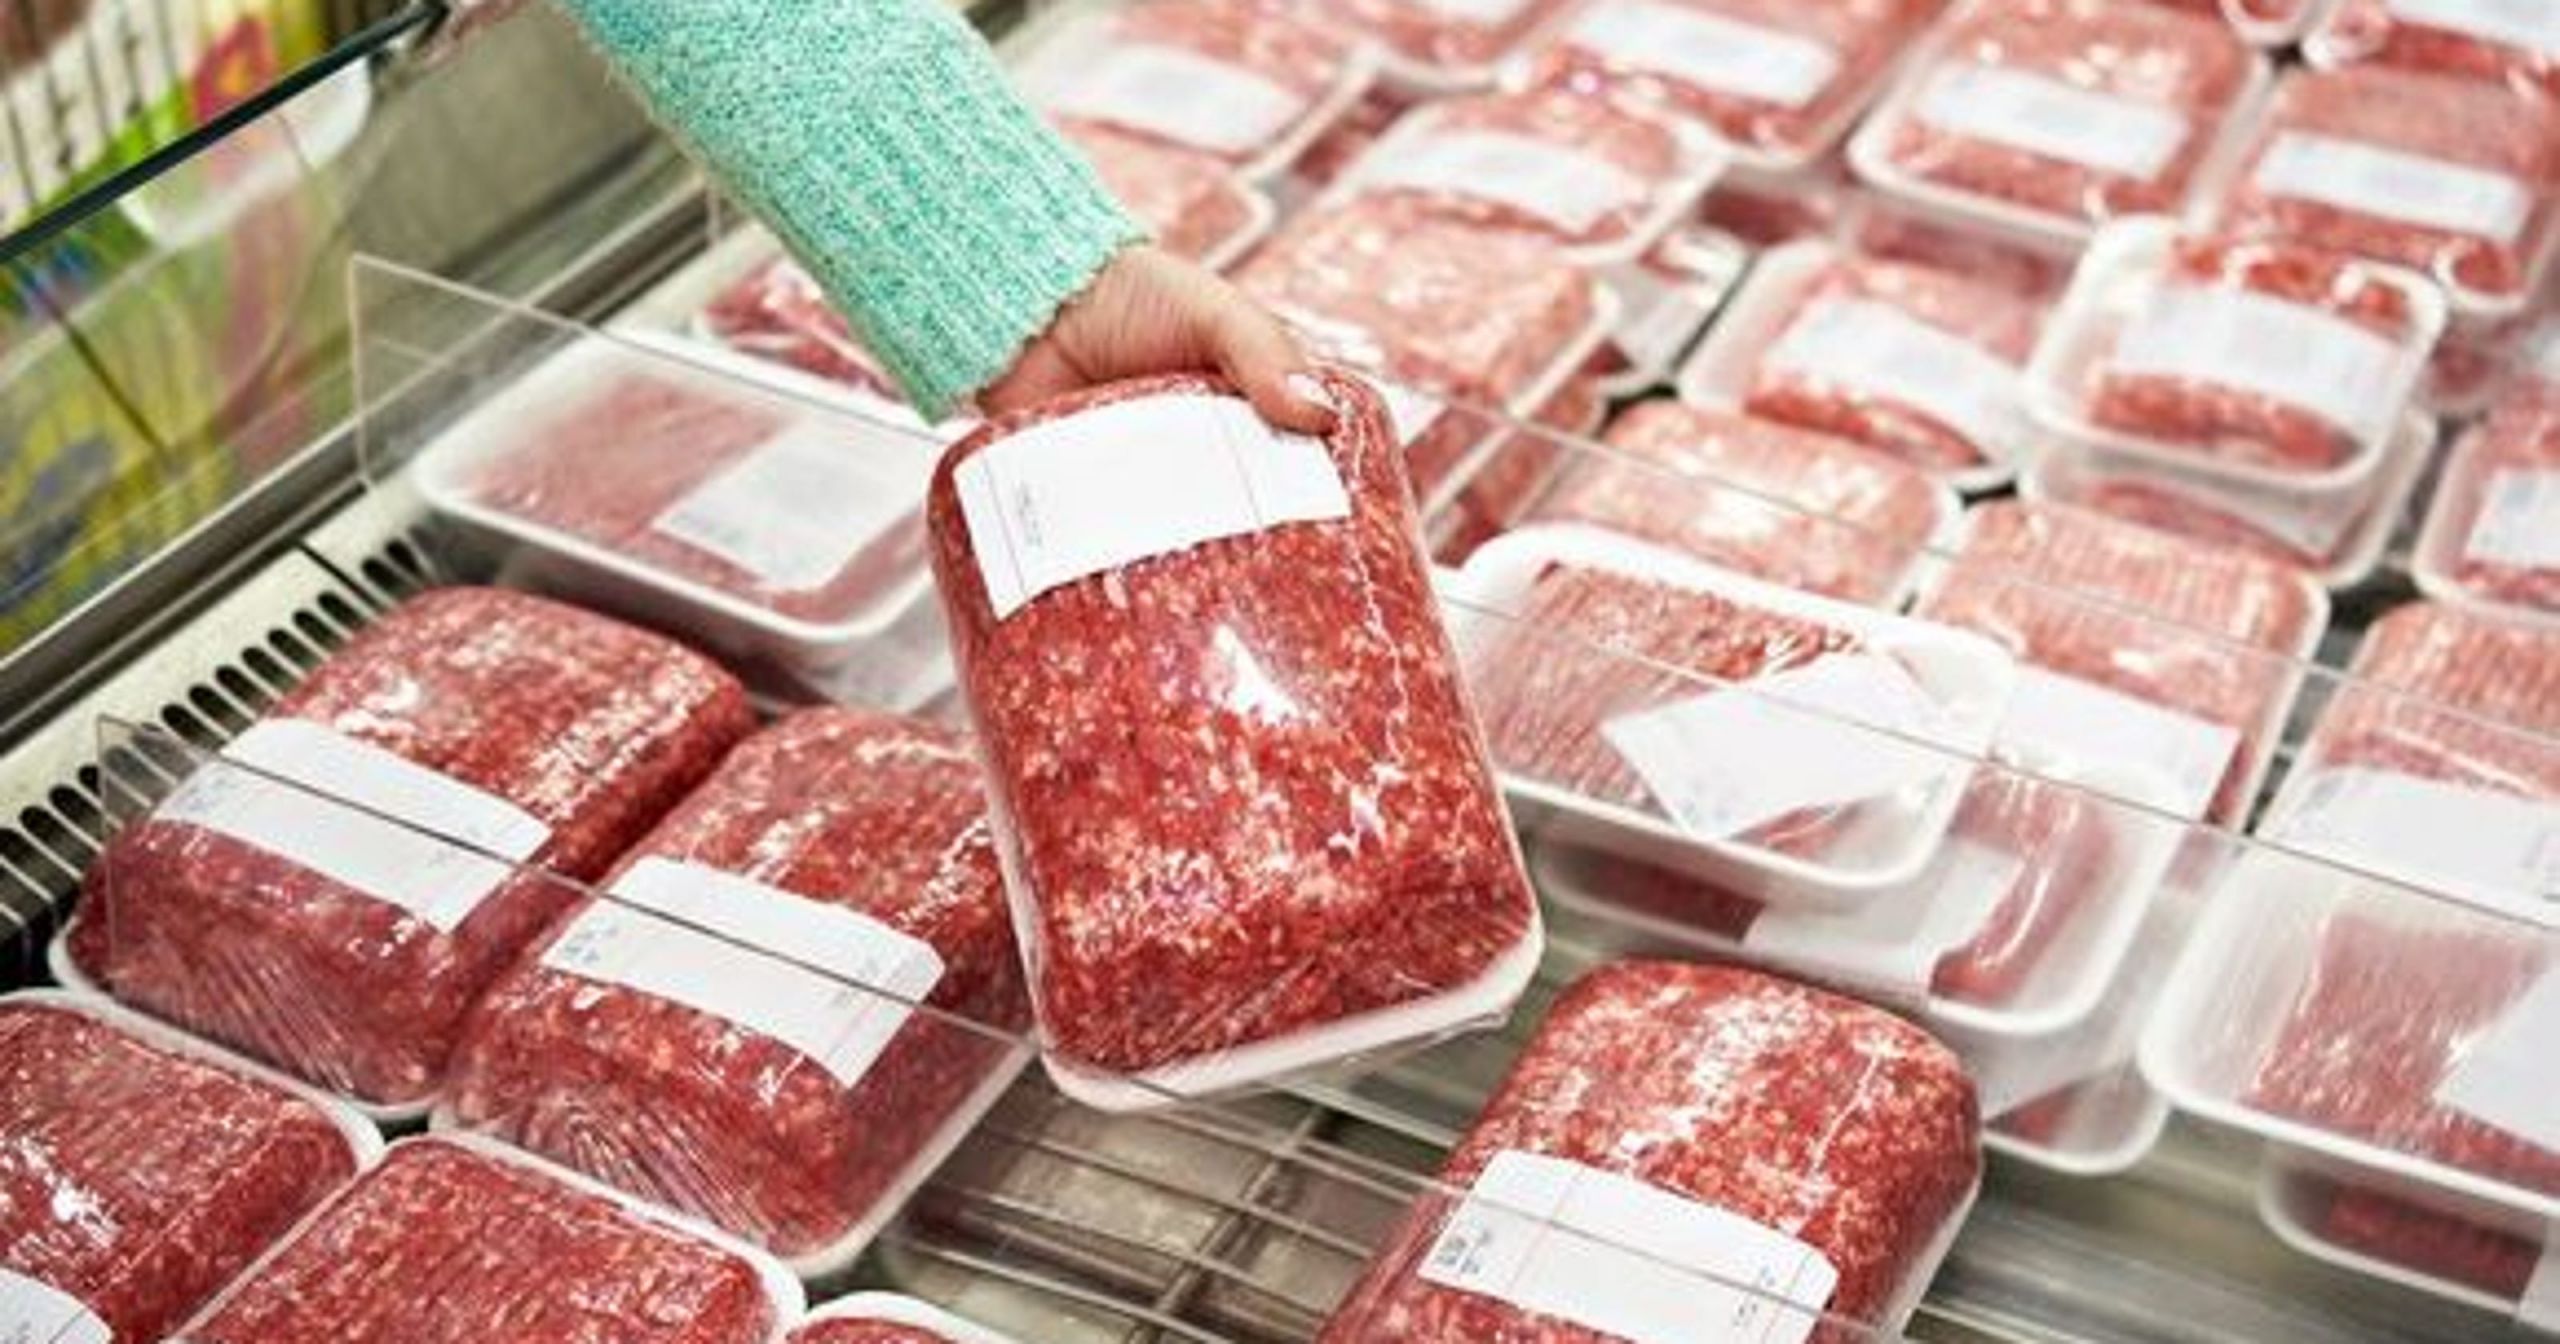 Recalled Ground Beef
 Huge recall for ground beef sold at Meijer Tar for E coli